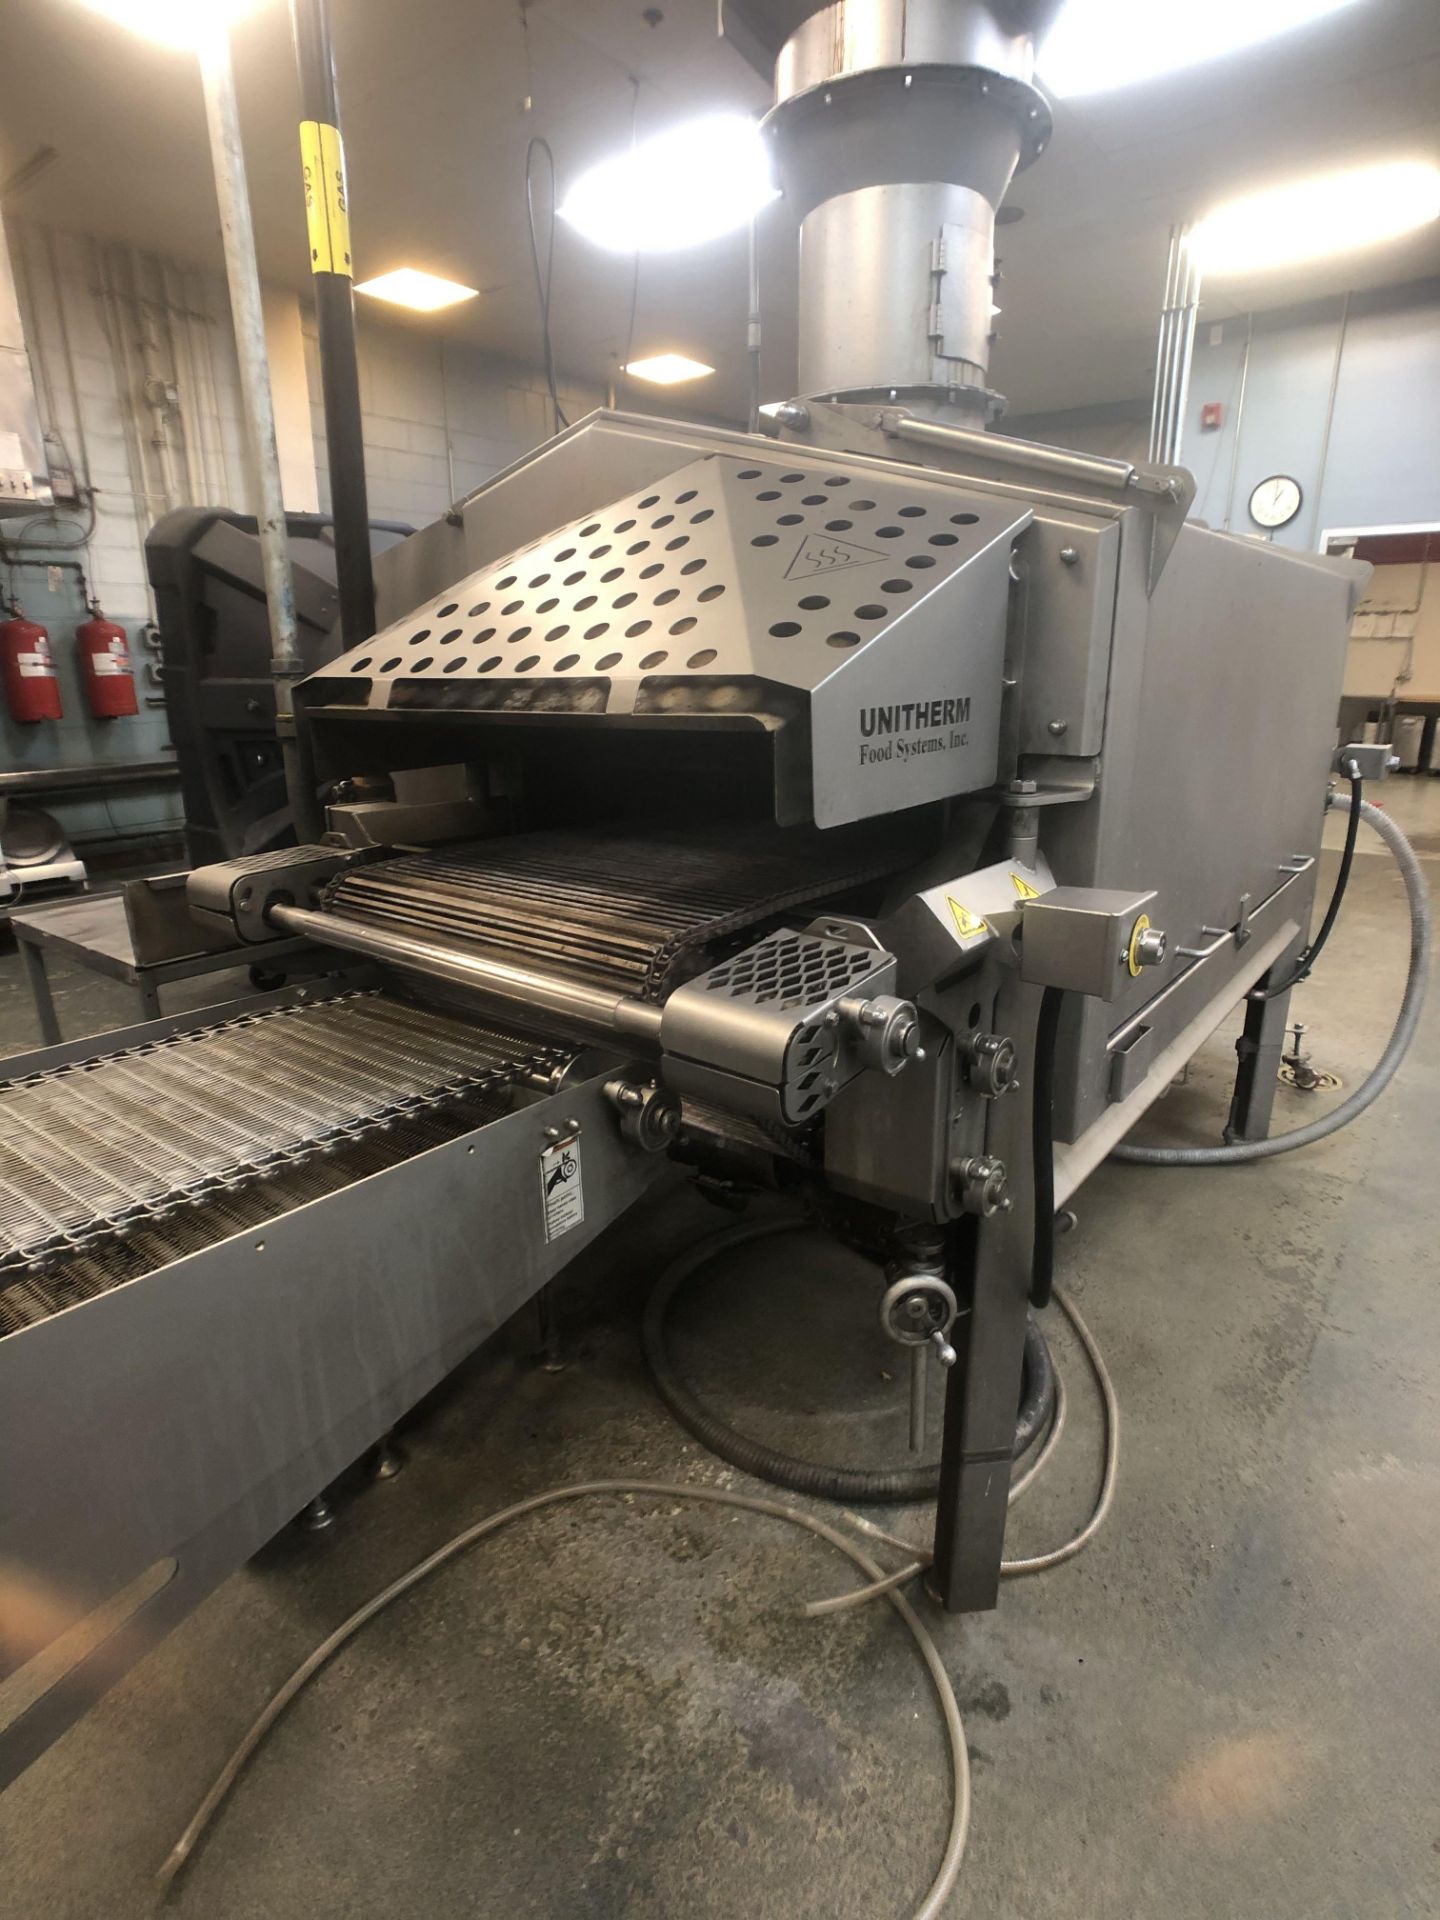 2019 Unitherm Food Systems 24" Flame Grill with Preheat, Model FG-24-8B-P, S/N FLGR-2485, Includes - Image 12 of 19